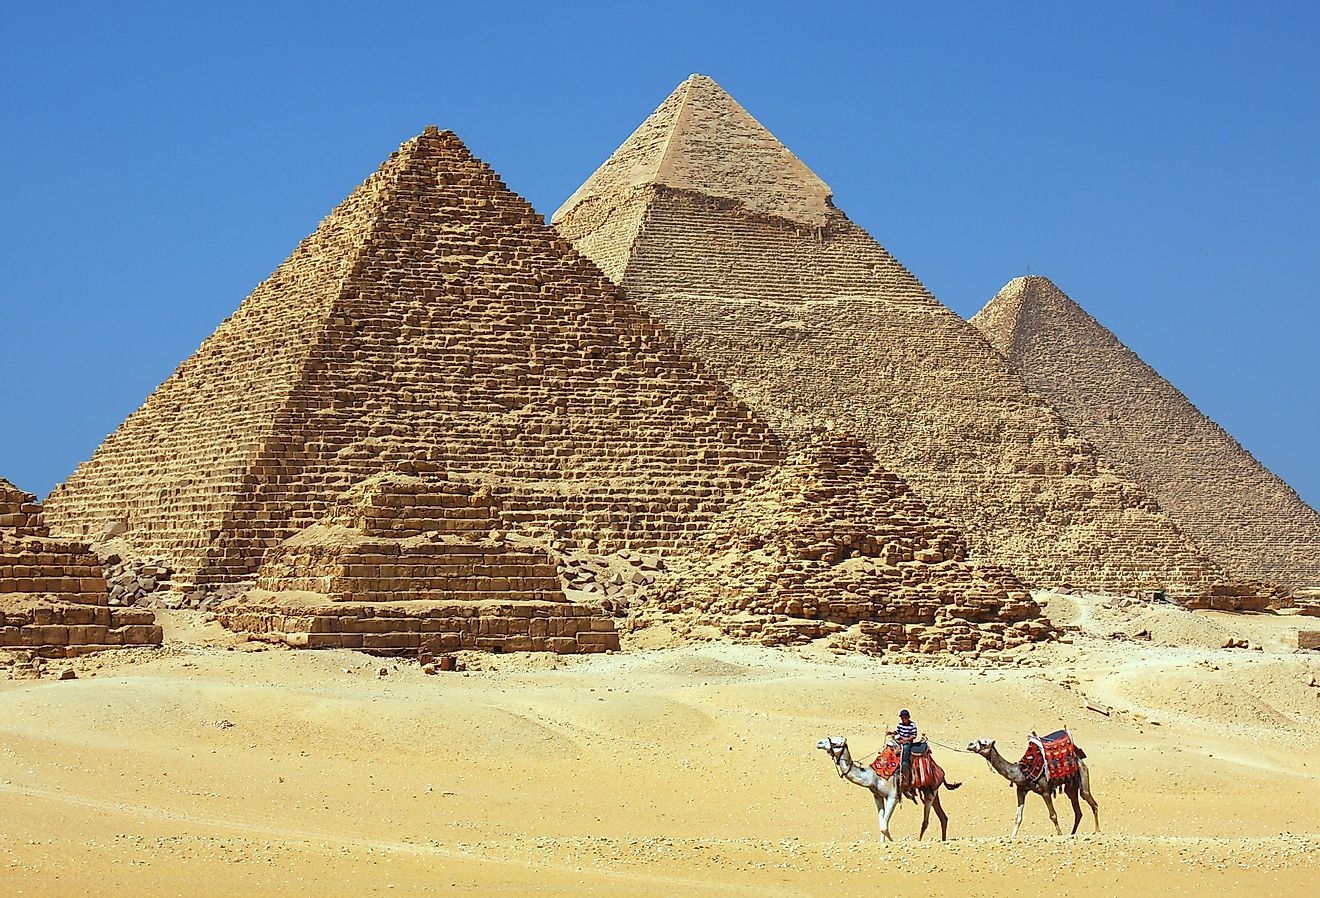 The Great Pyramid of Khufu is the only one of the Seven Wonders of the Ancient World still in existence. Image credit Dan Breckwoldt via Shutterstock